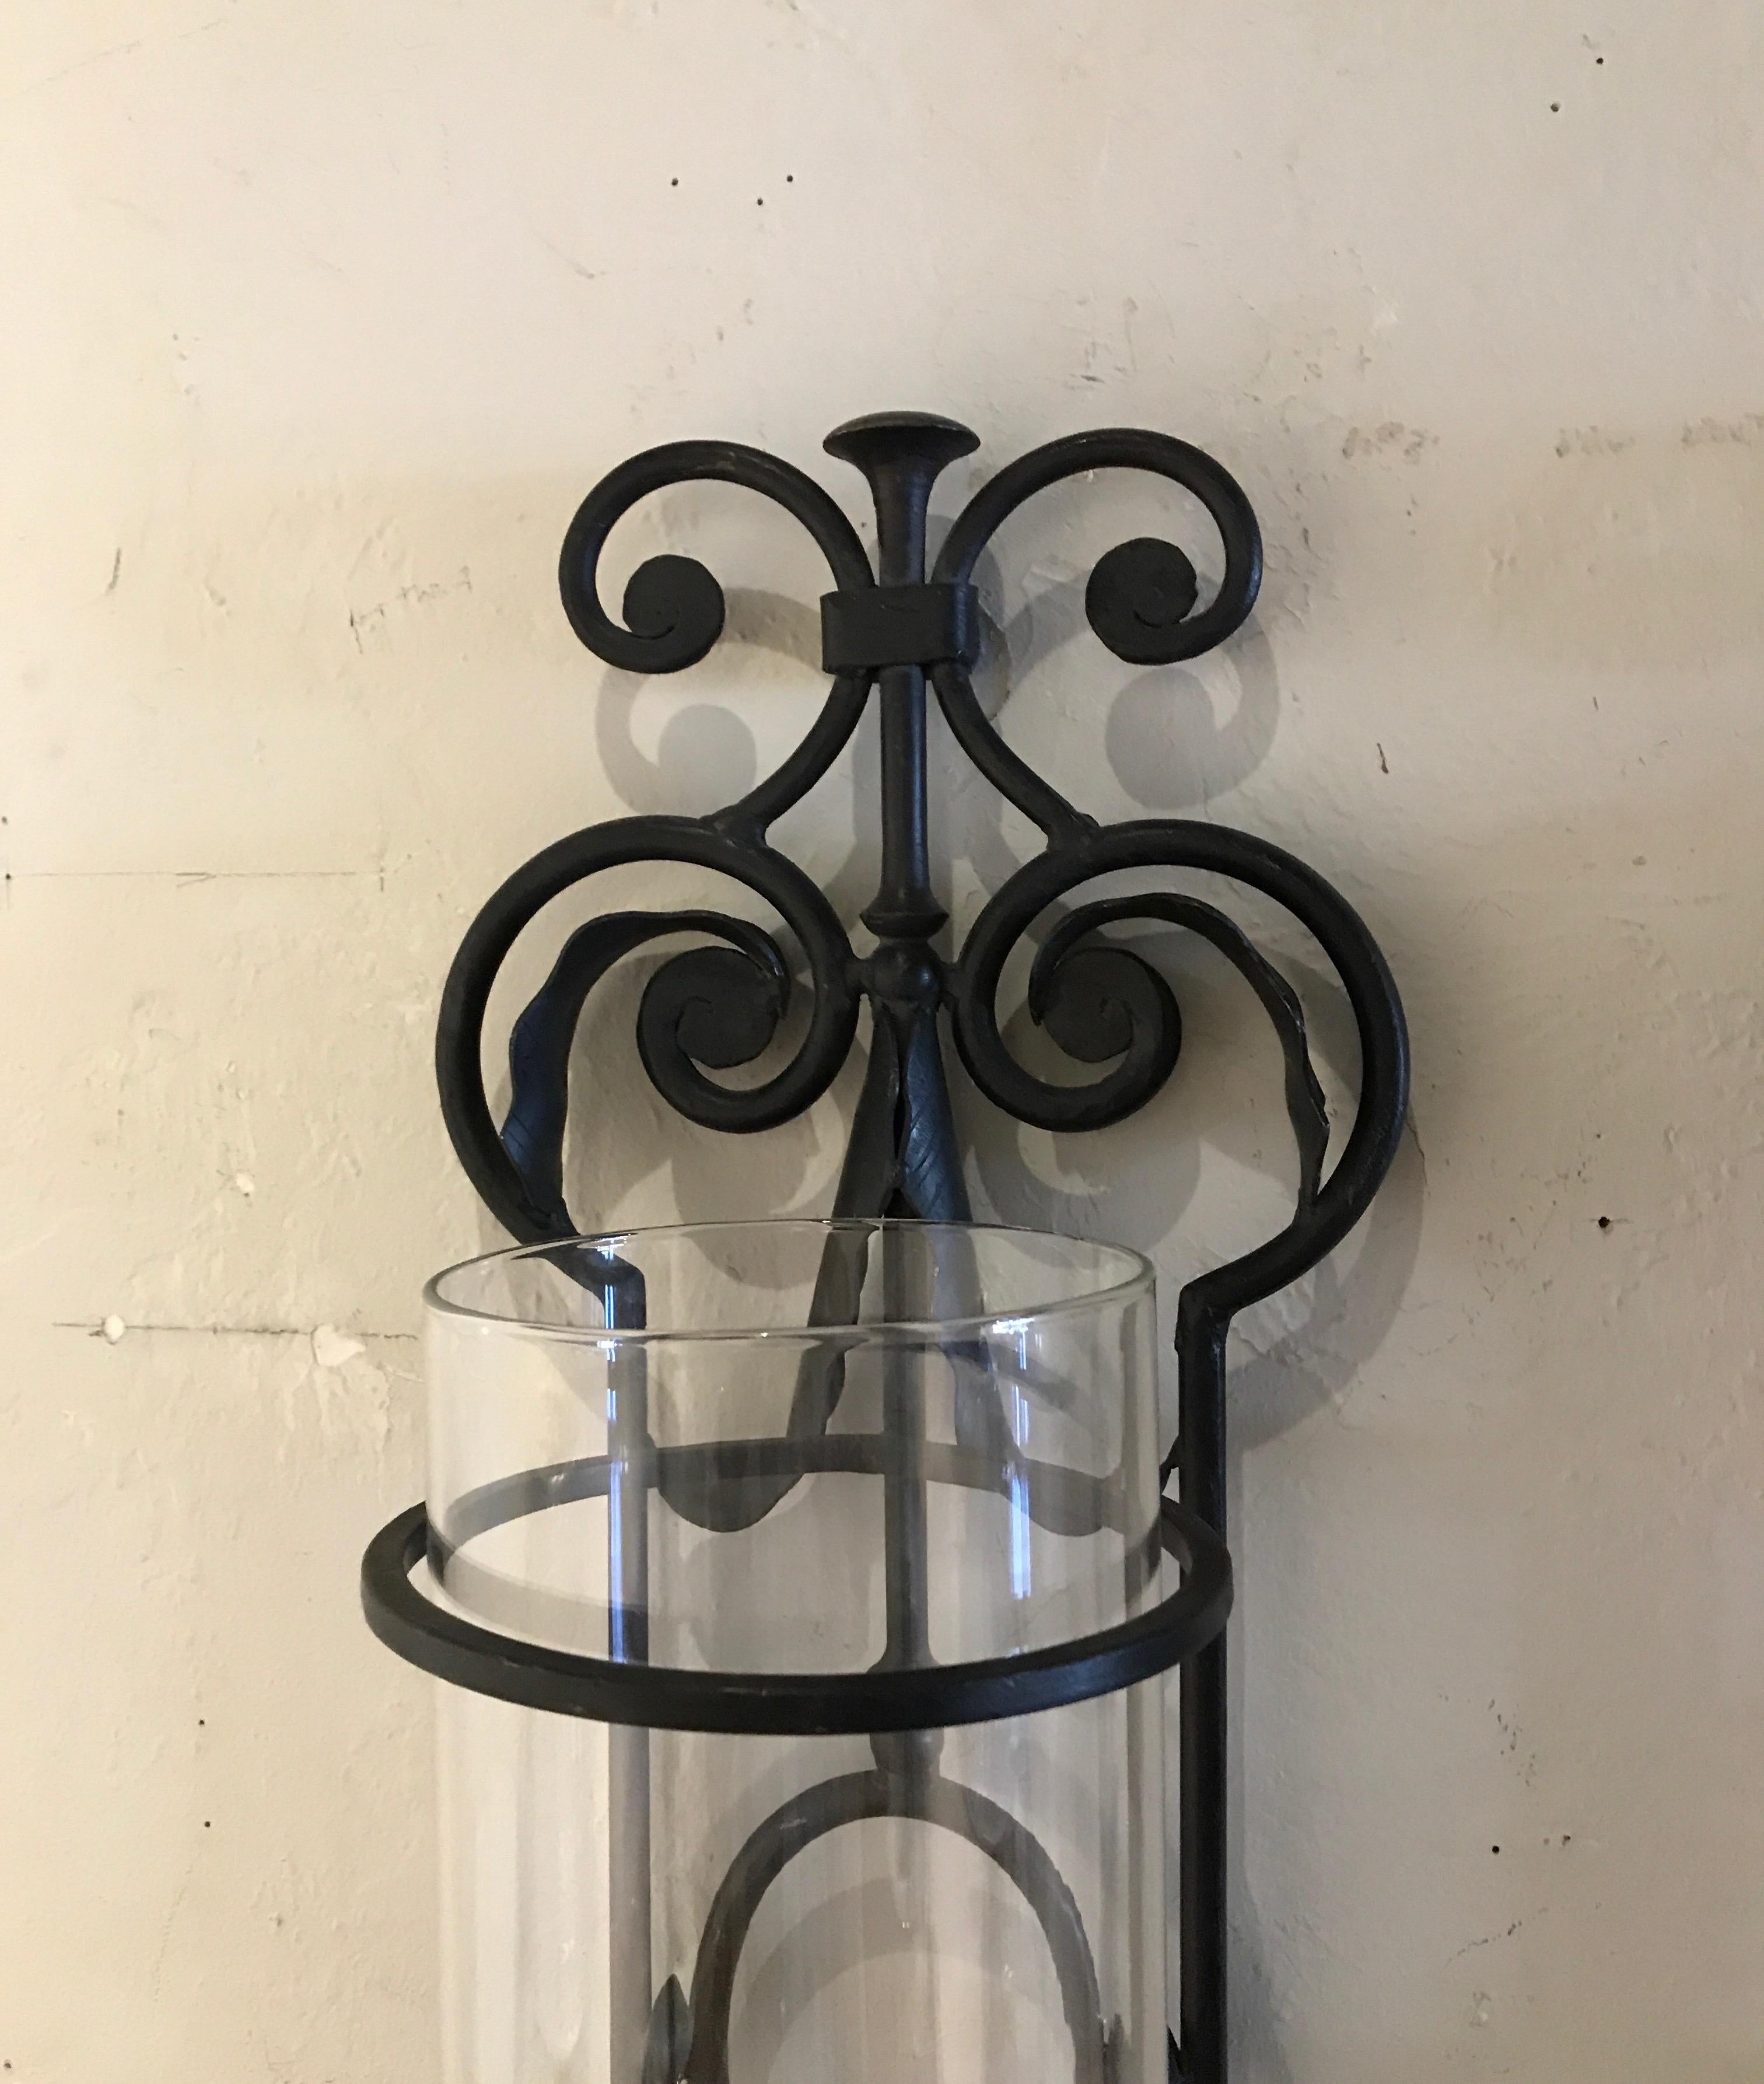 Vintage pair of black wrought iron wall mounted hurricanes with glass cylinders.
Hold pillar candles.